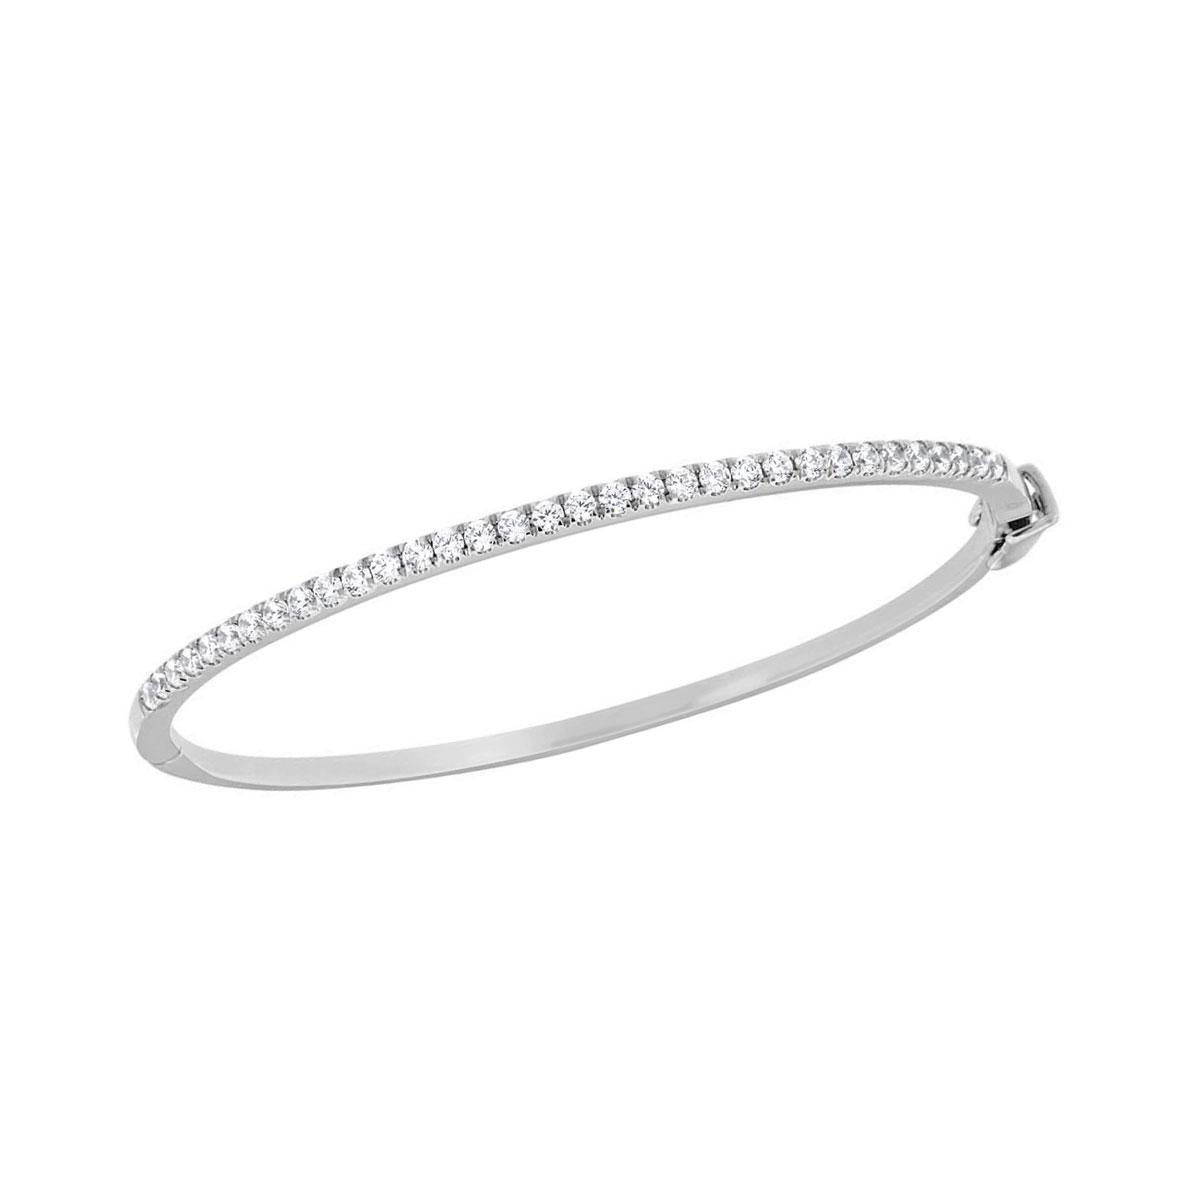 18 Karat White Gold Micro-Prong Diamond Bangle '1 Carat' In New Condition For Sale In San Francisco, CA